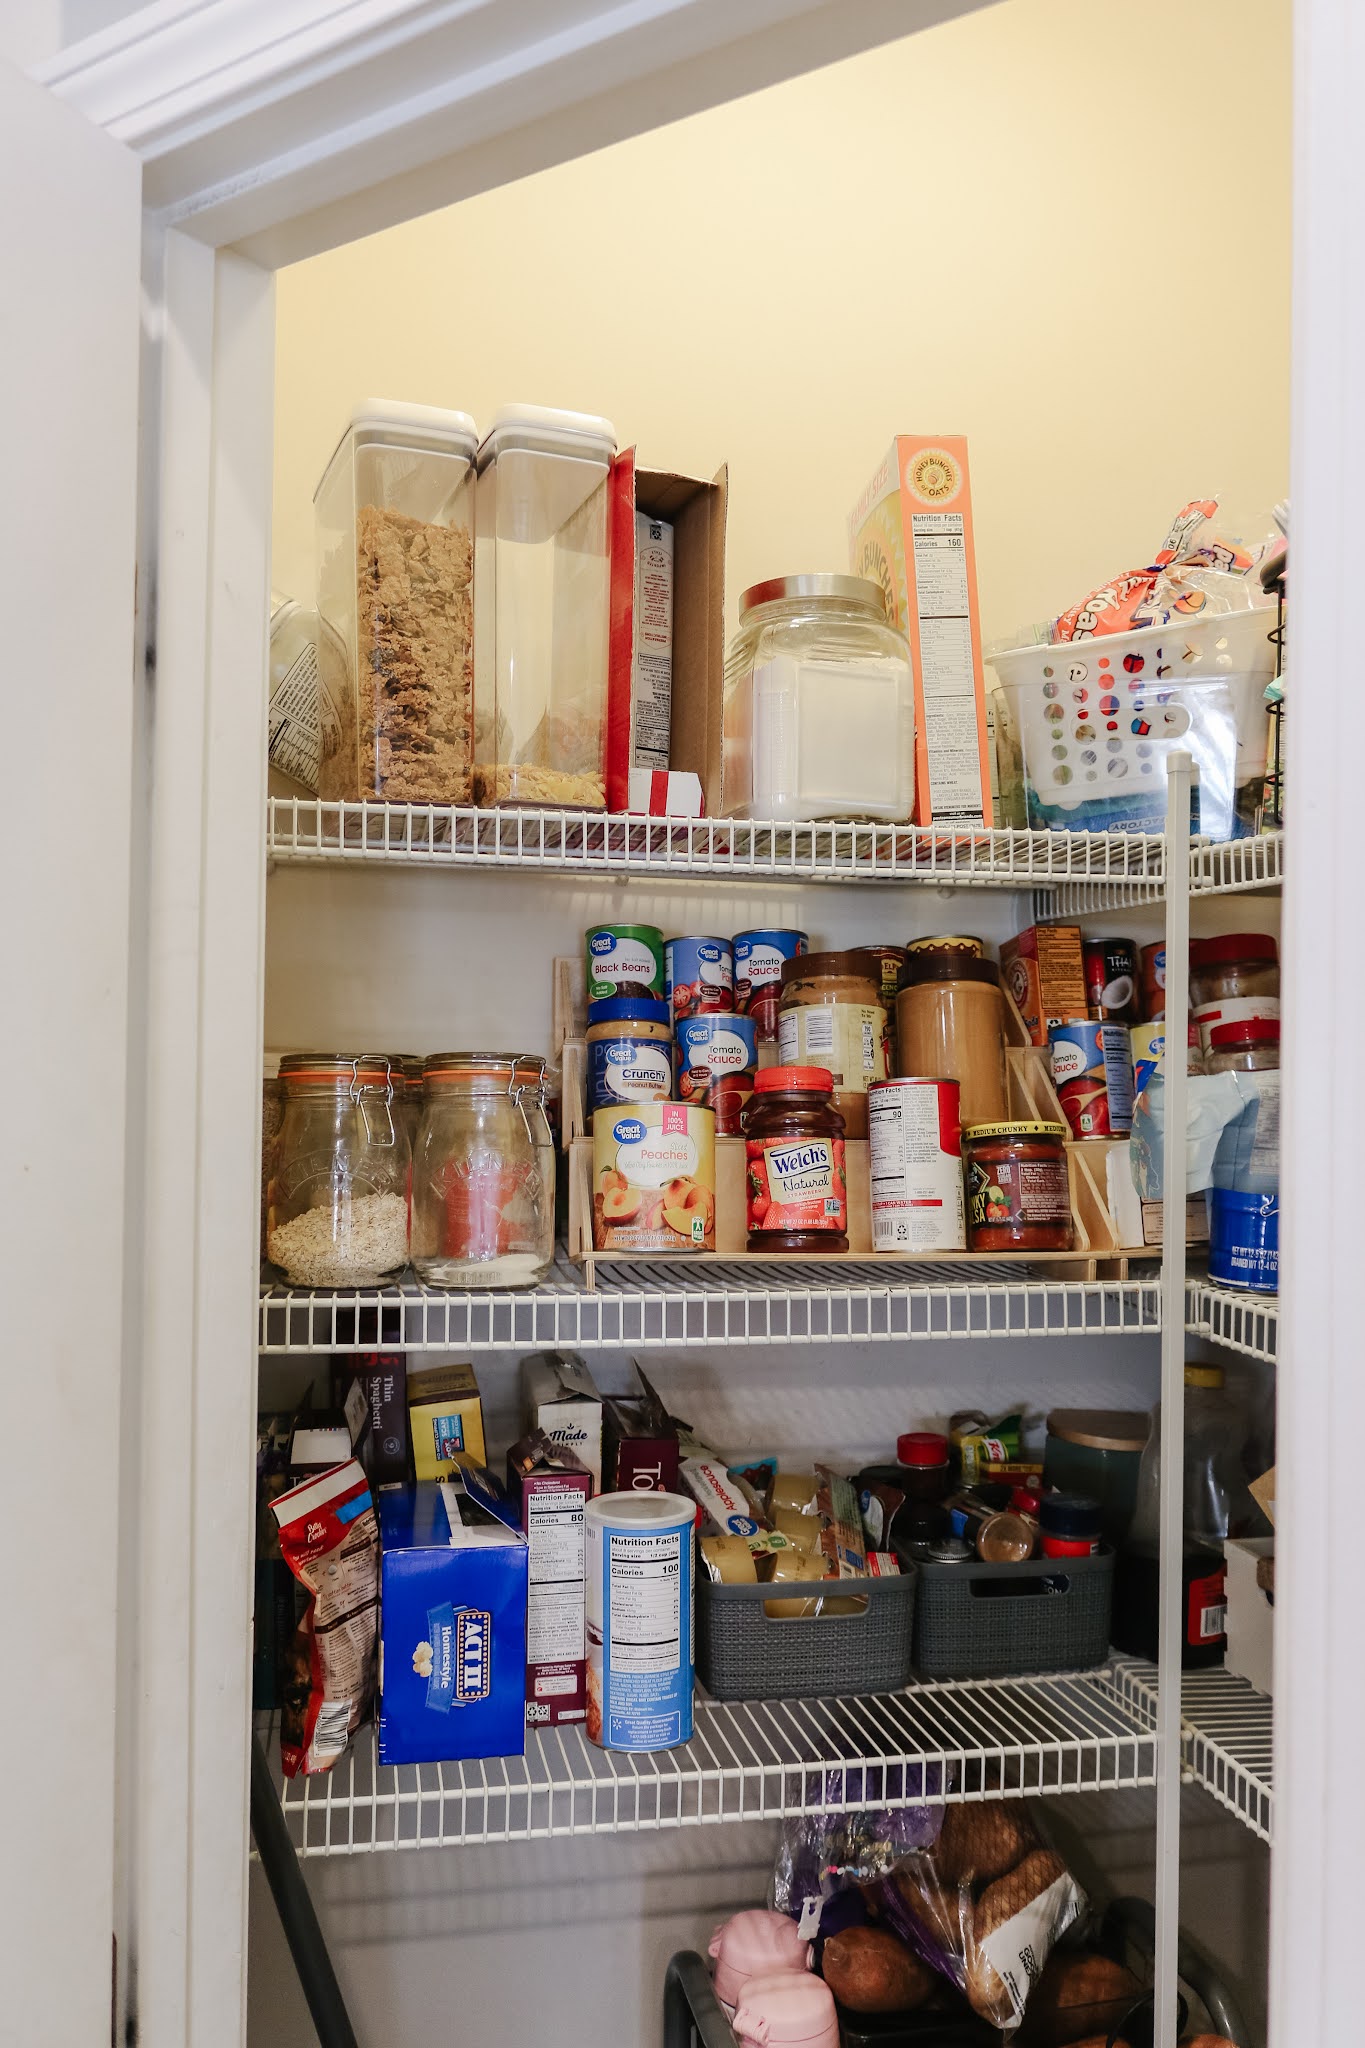 Practical + Cute Pantry Organization with Baskets - Organizing Moms